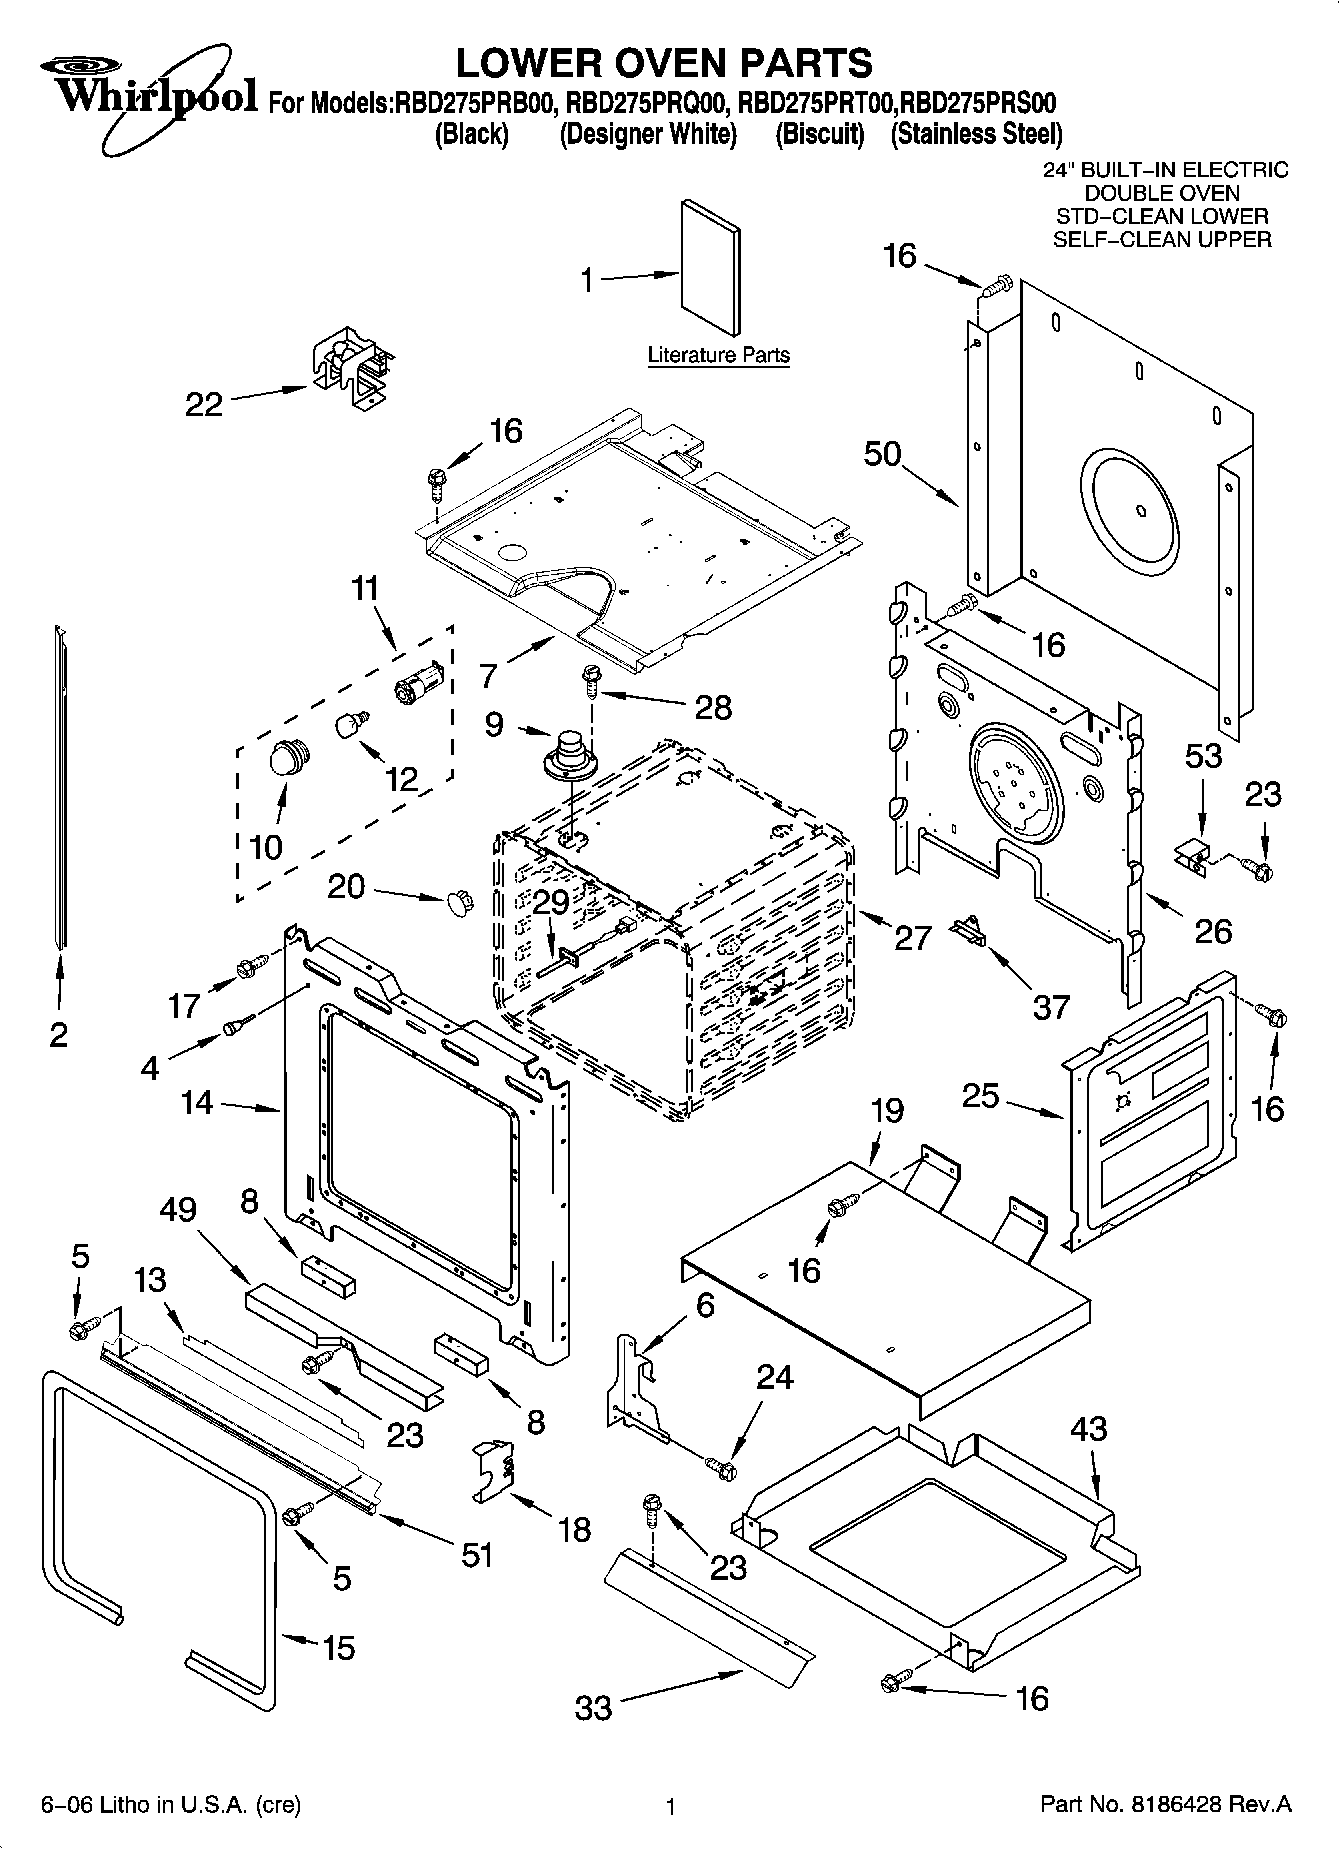 01 - LOWER OVEN PARTS